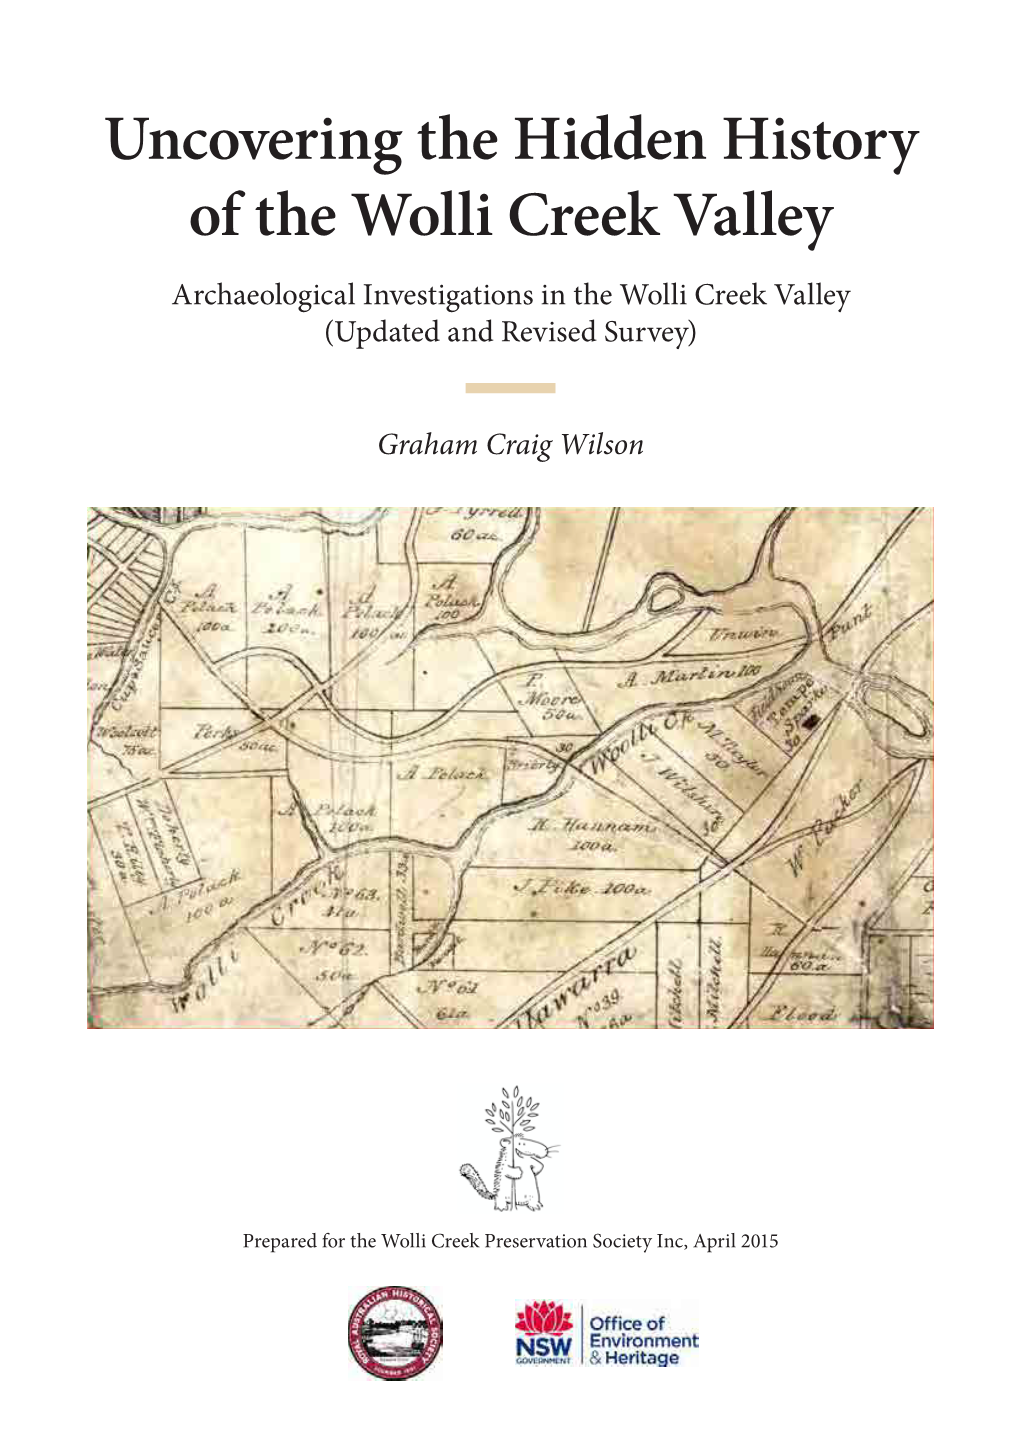 Uncovering the Hidden History of the Wolli Creek Valley Archaeological Investigations in the Wolli Creek Valley (Updated and Revised Survey)